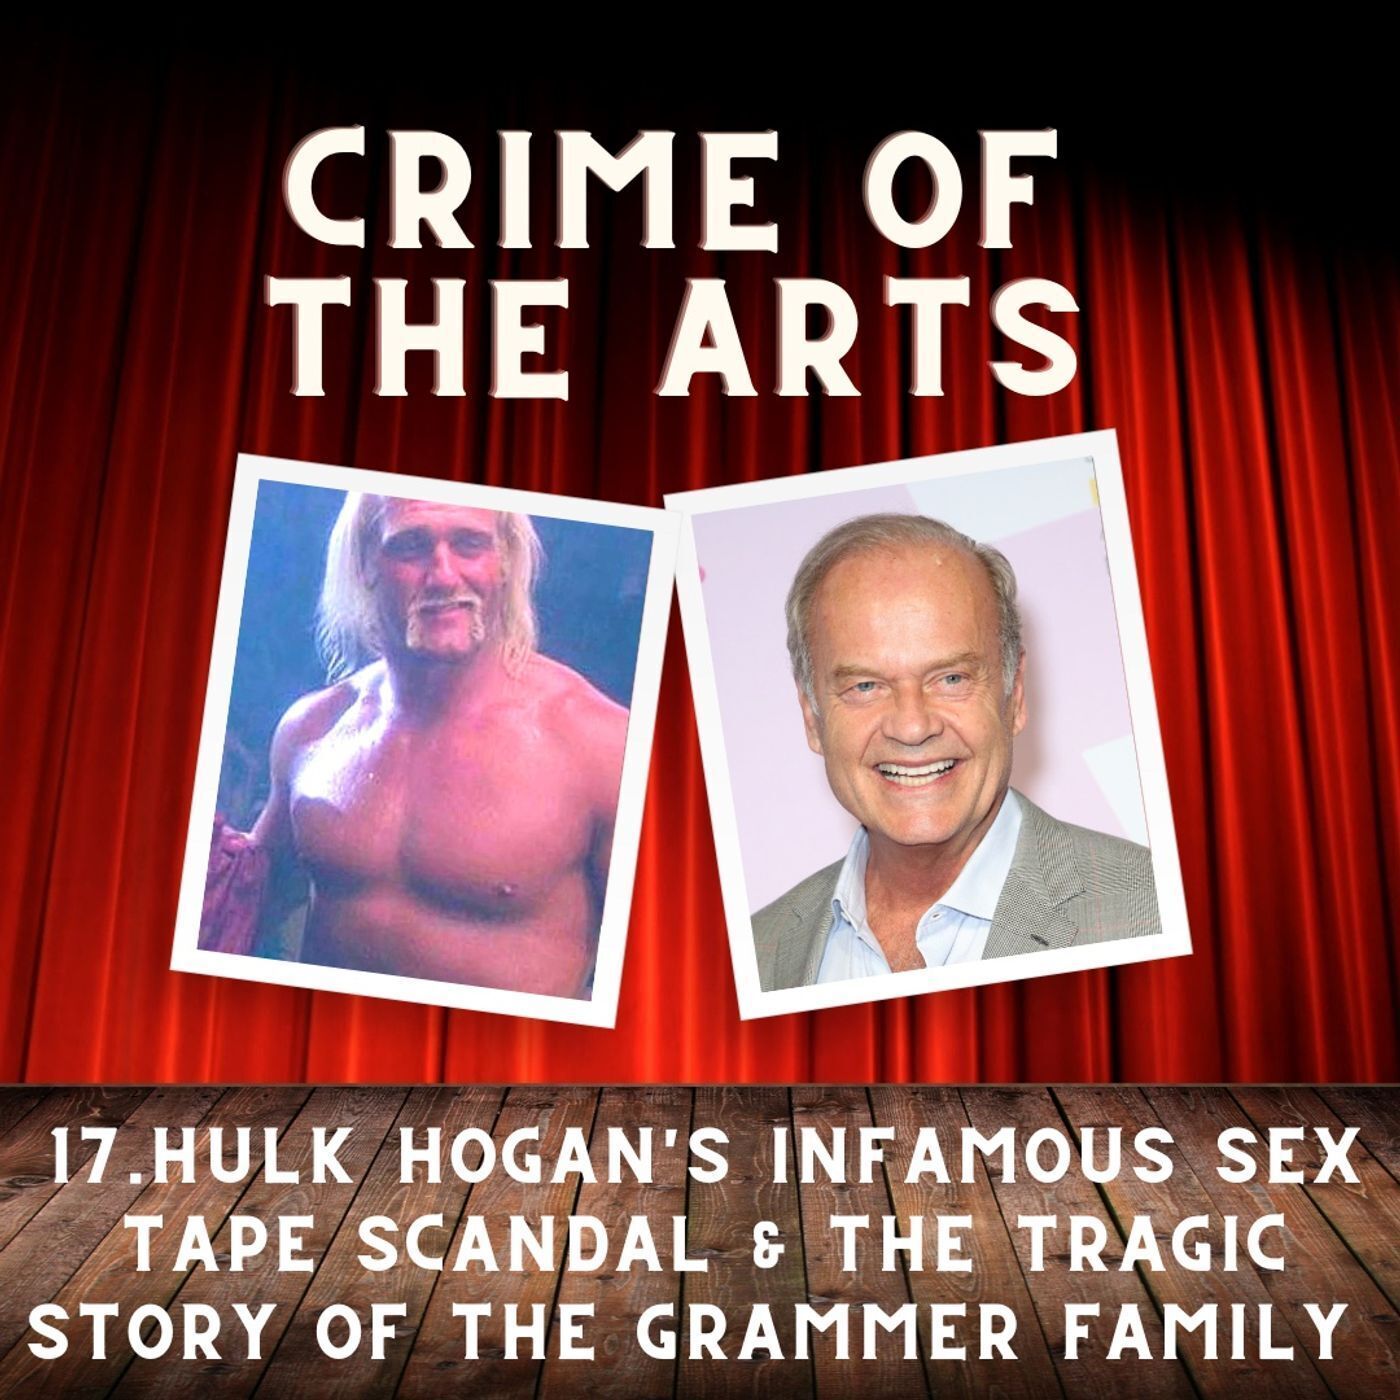 Crime of the Arts / Hulk Hogans Infamous Sex Tape Scandal and The Tragic Story of the Grammer Family